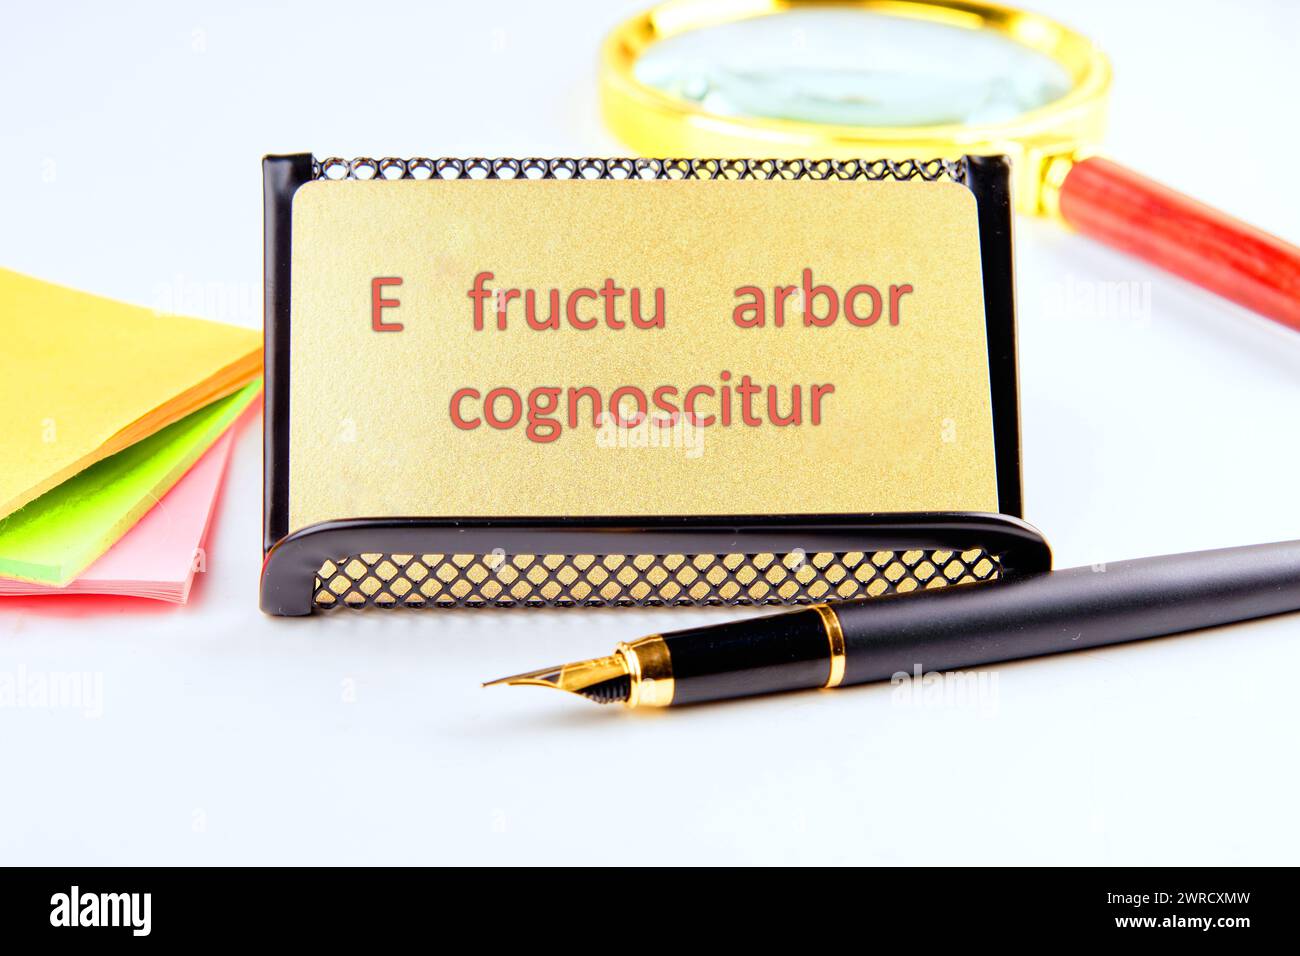 E fructu arbor cognoscitur the phrase in Latin translates as the Tree is known by its fruits on a gold business card with highlighted text Stock Photo